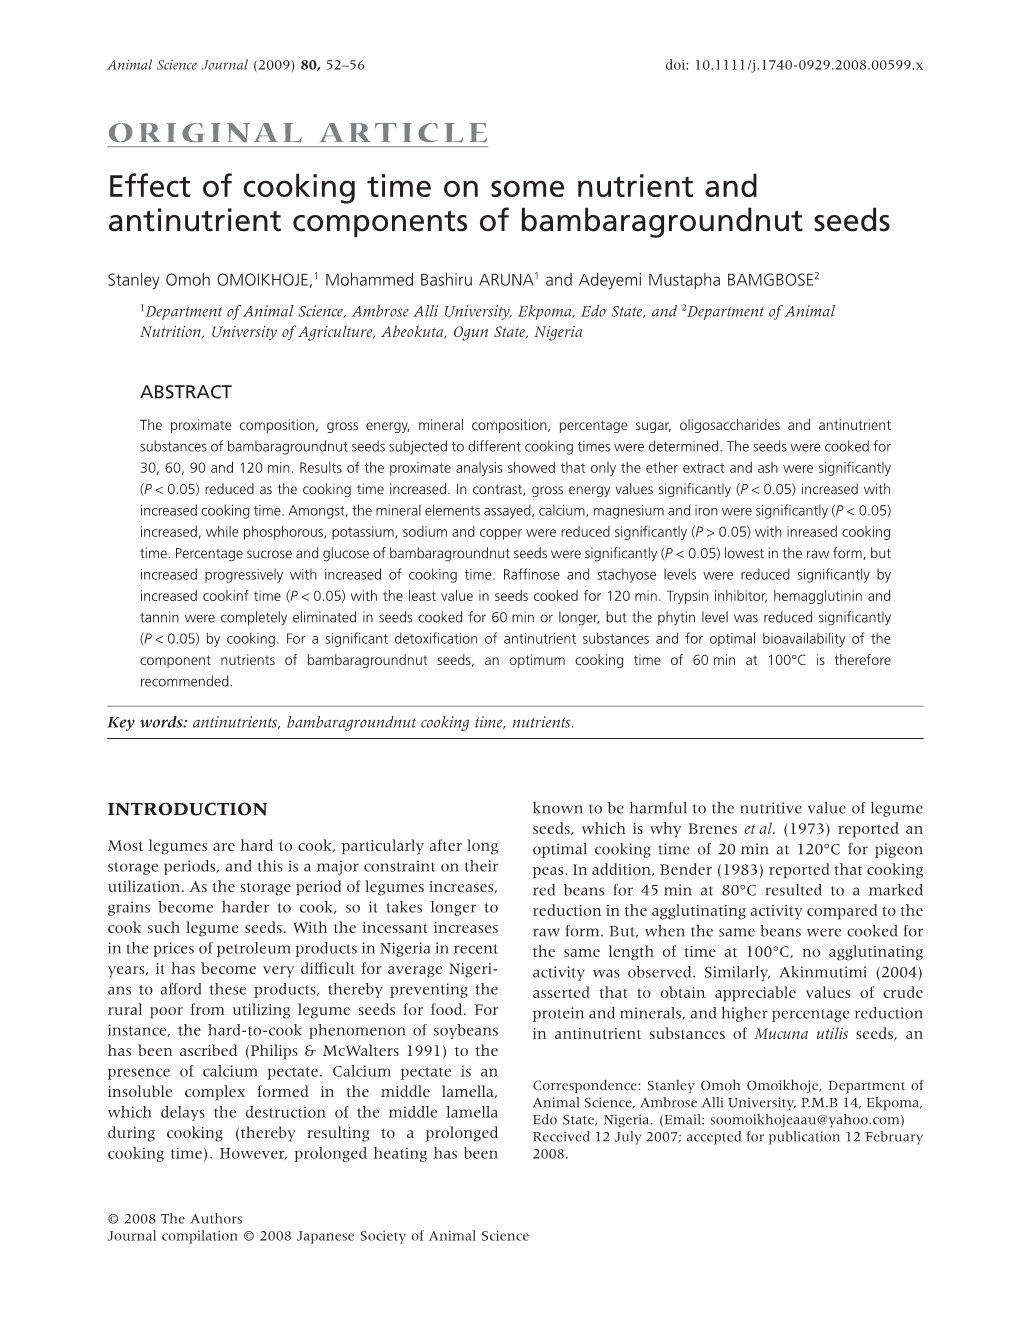 ORIGINAL ARTICLE Effect of Cooking Time on Some Nutrient and Antinutrient Components of Bambaragroundnut Seeds